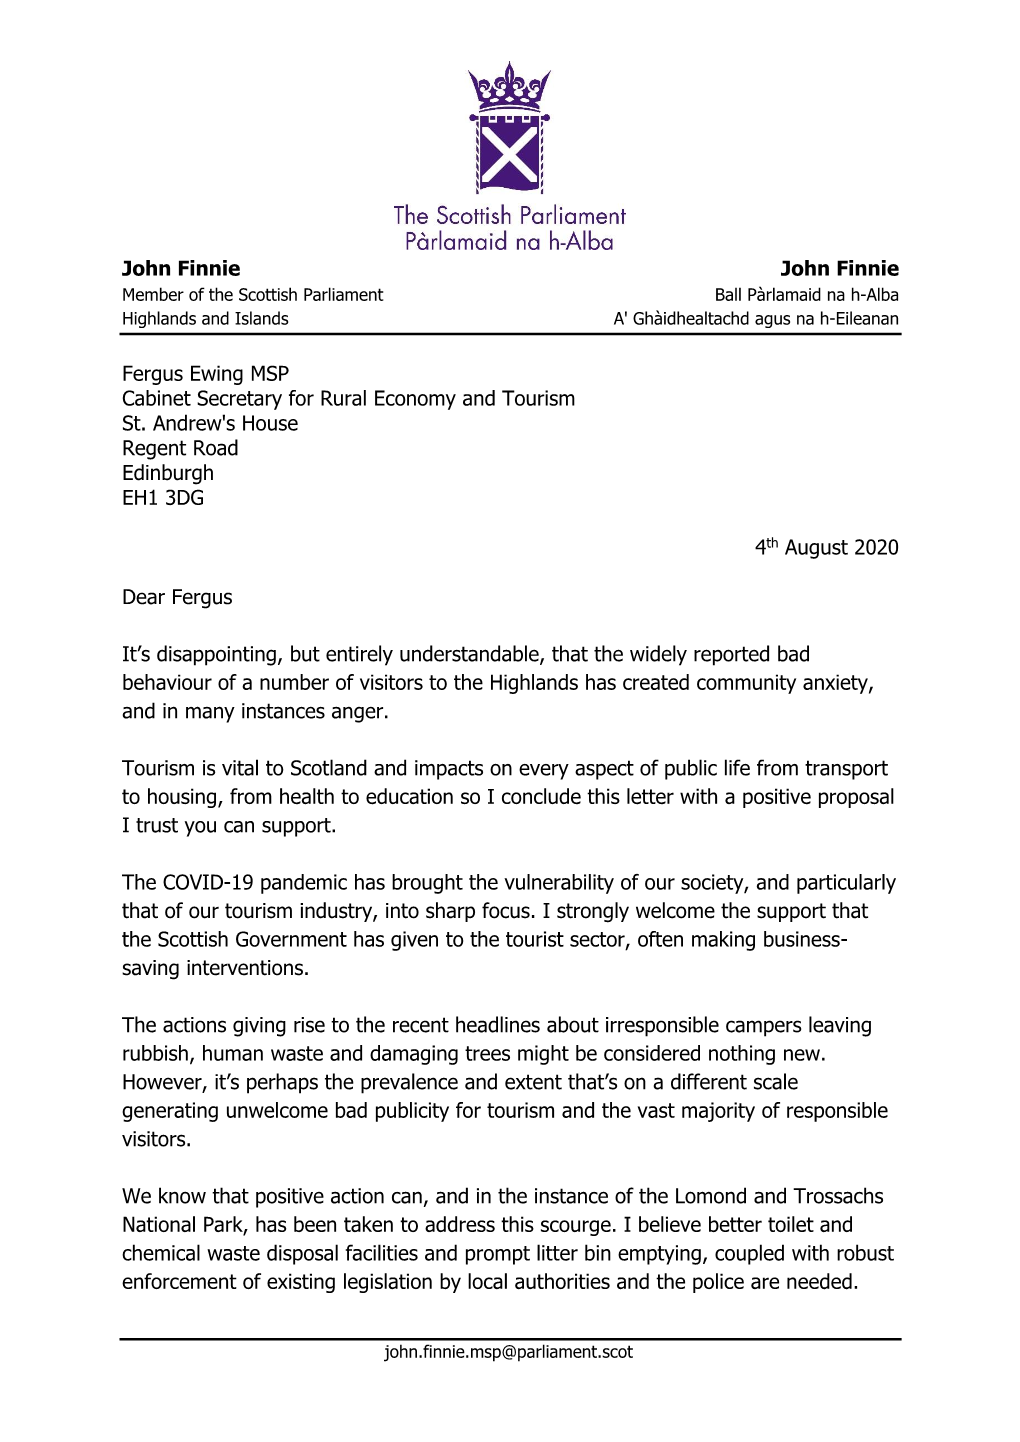 20200804 Letter to Fergus Ewing- Review Into